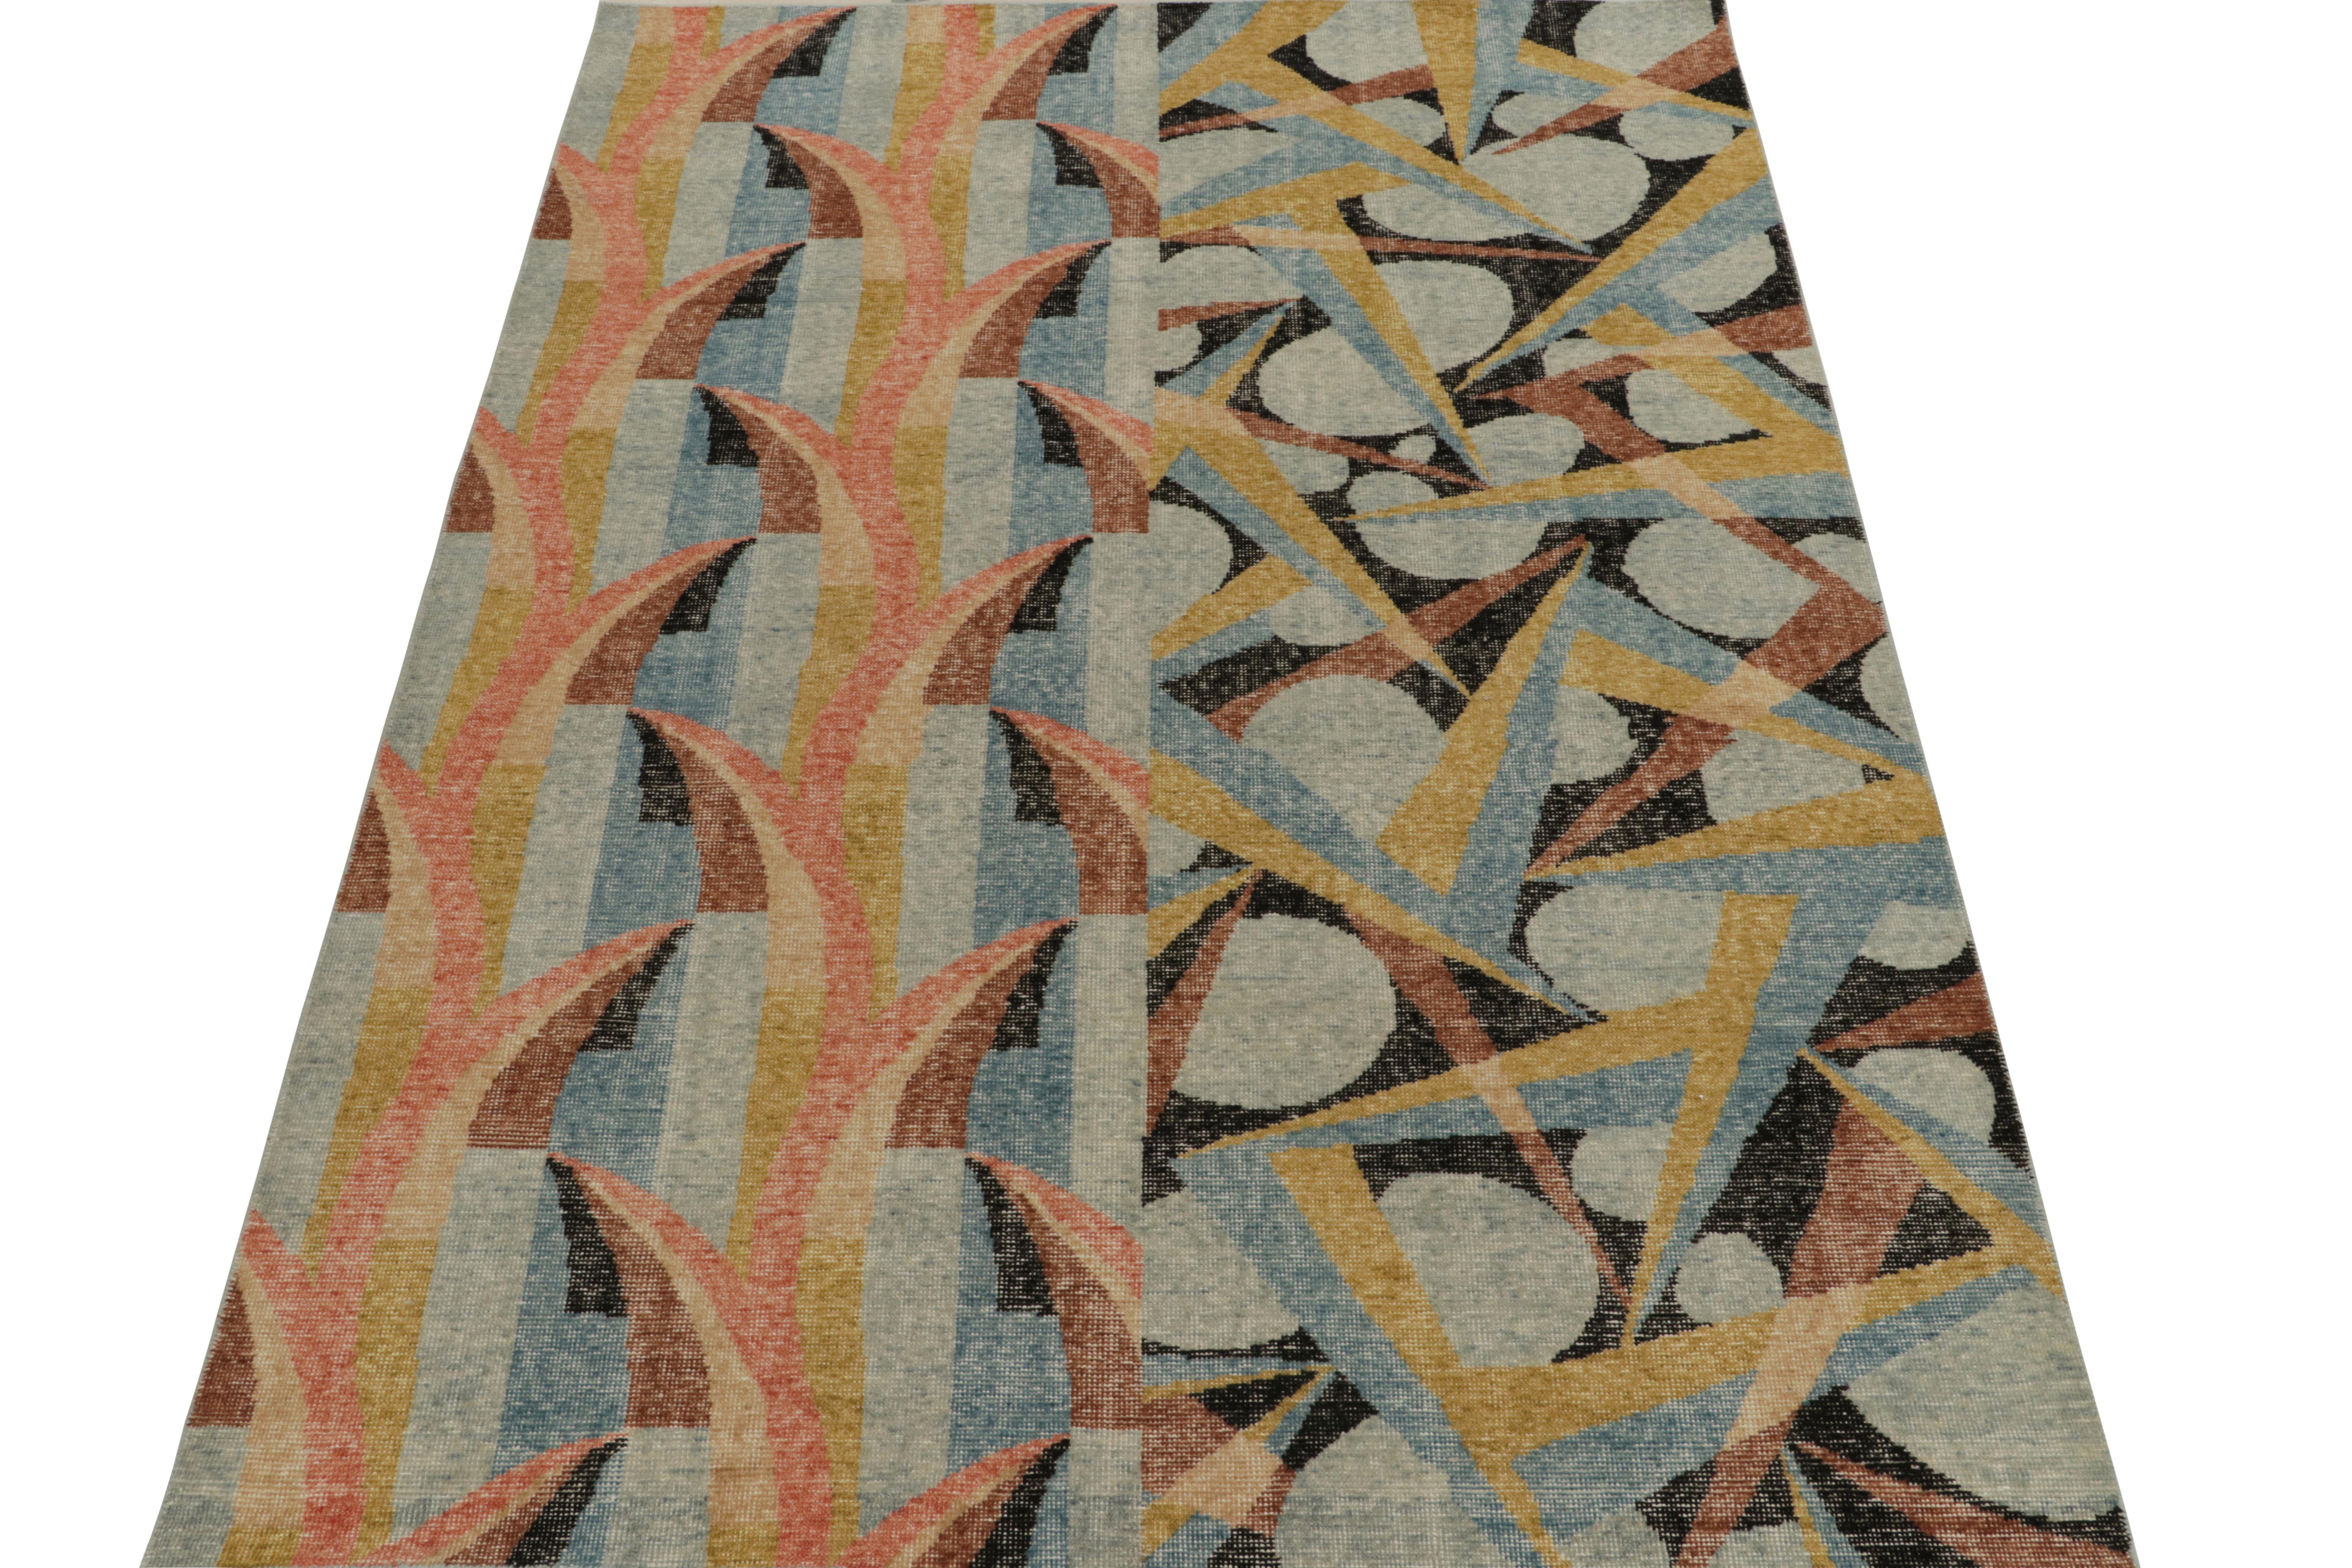 Art Deco Rug & Kilim’s Distressed Deco Style Rug in Blue & Beige-Brown Geometric Patterns For Sale